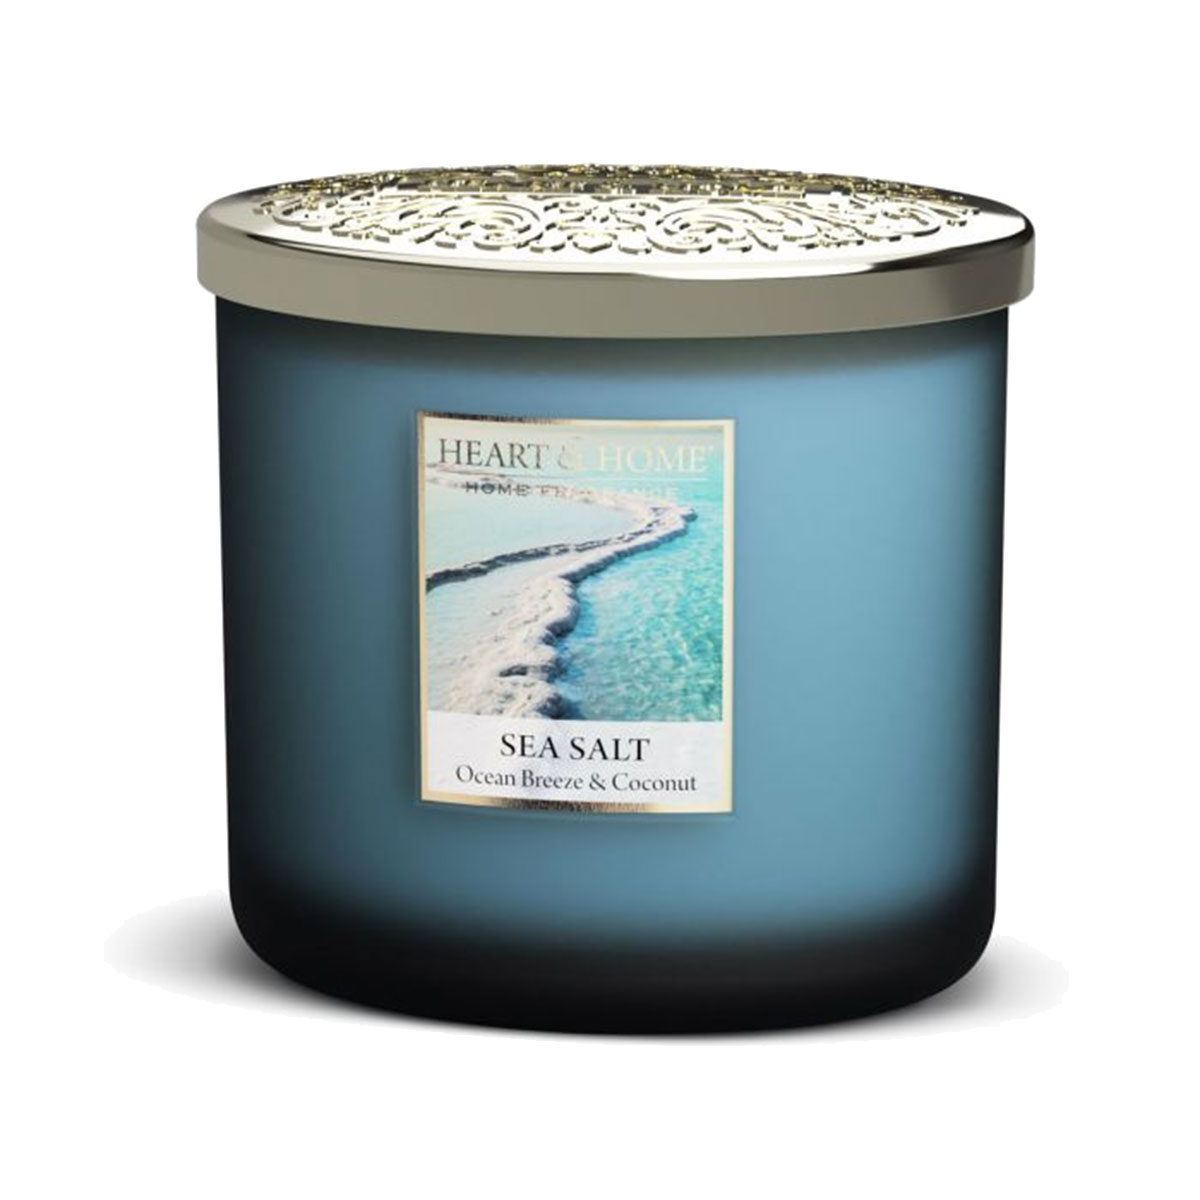 Elliptical Candle with 2 Wicks Heart and Home Sea Salt